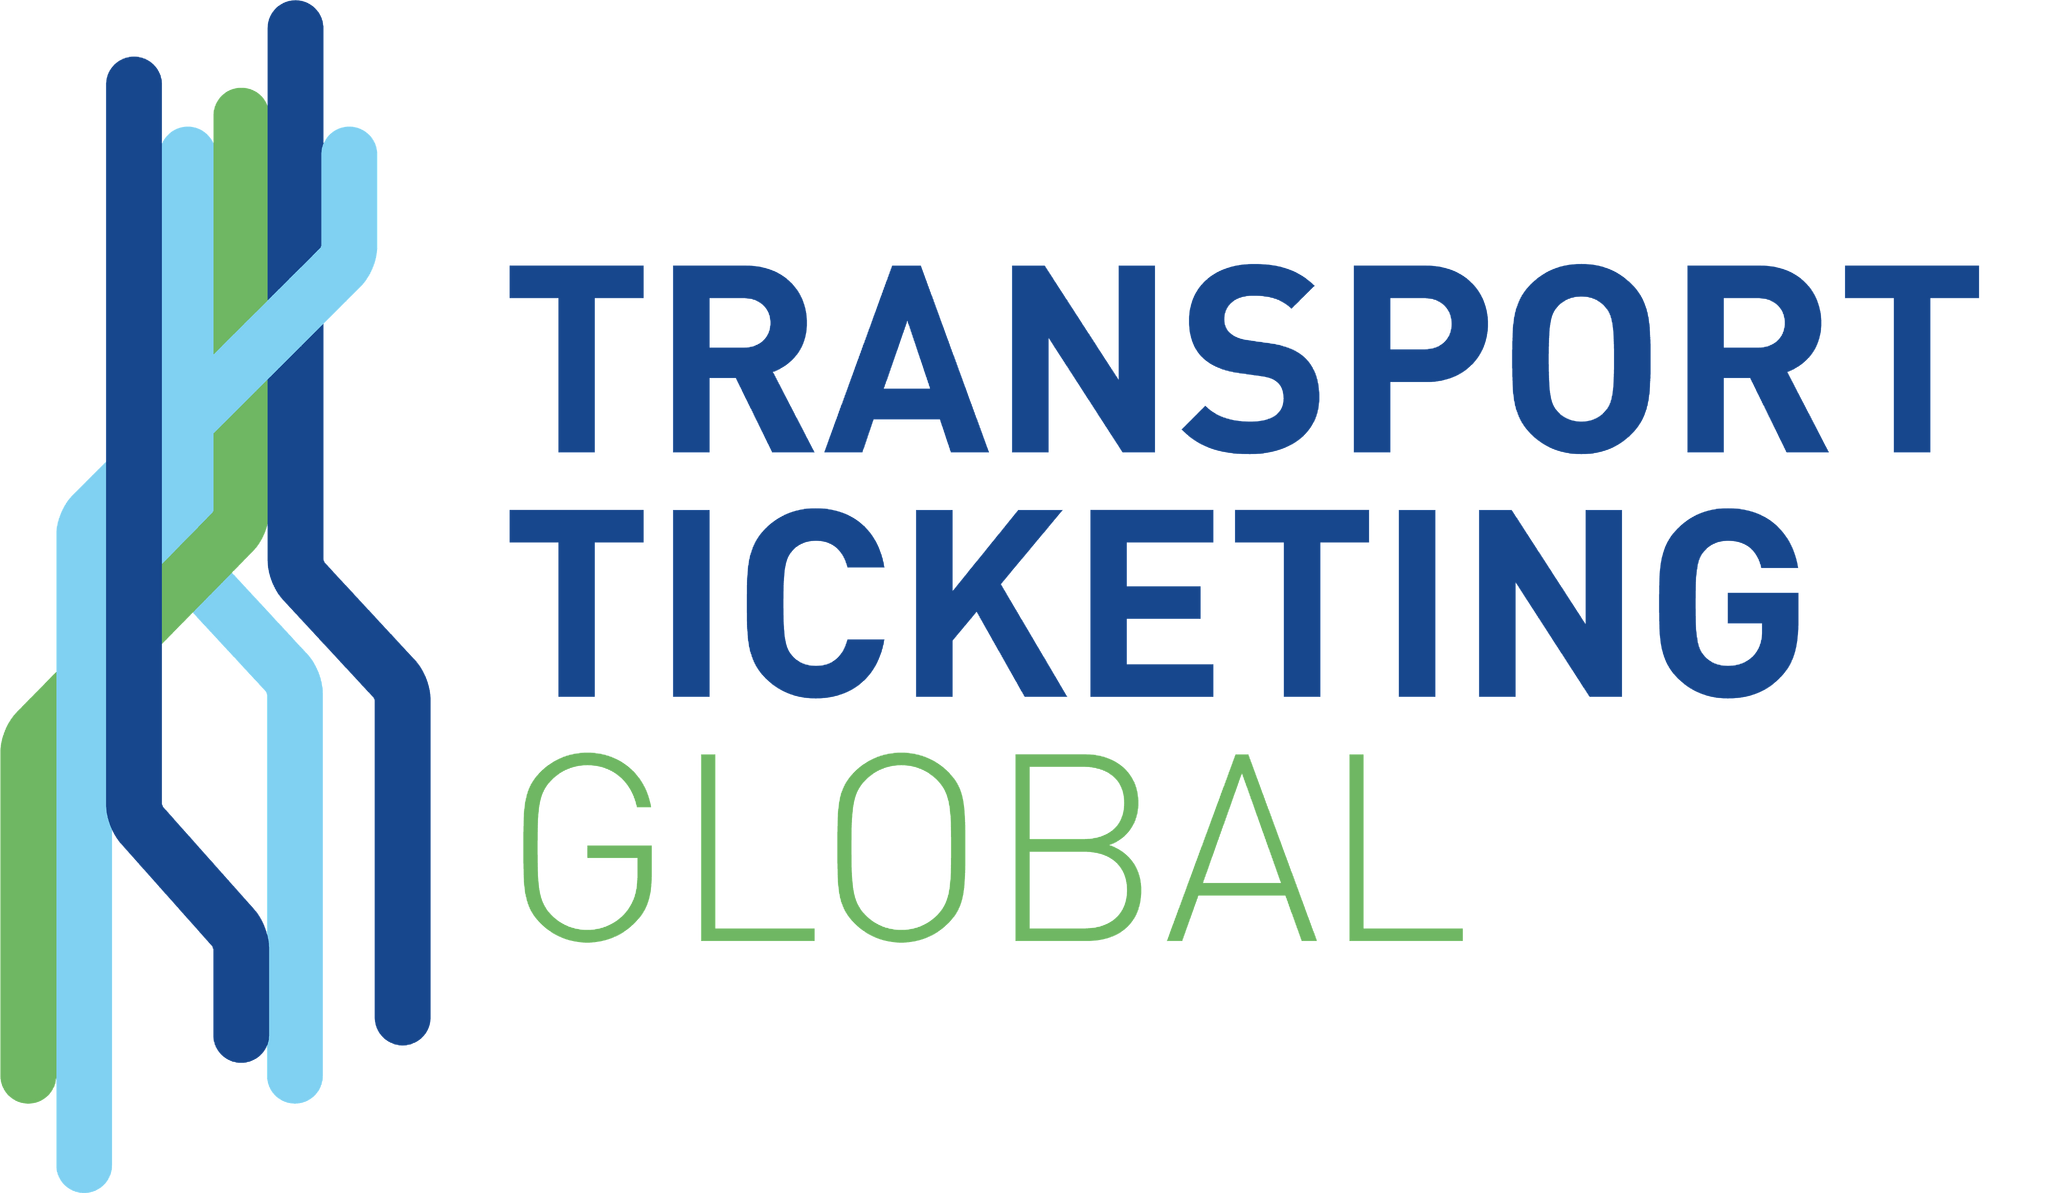 Learn about the highlights of the Transport Ticketing Global and meet FAIRTIQ